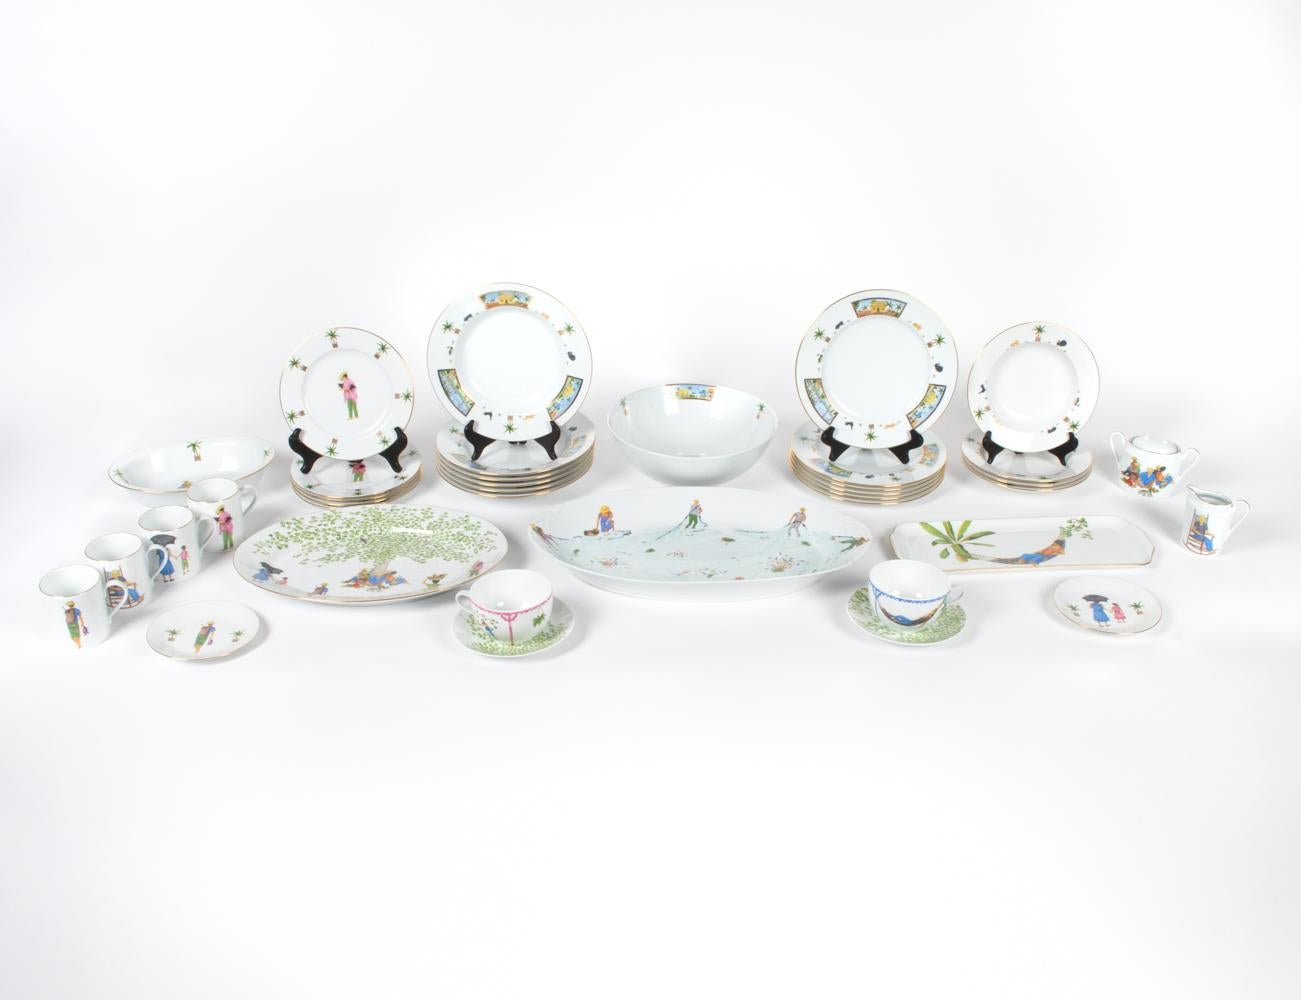 A rare near-complete dinner & tea service for 6 by the exceptional designer of Fine china, Philippe Deshoulieres. This set is almost entirely from the discontinued 